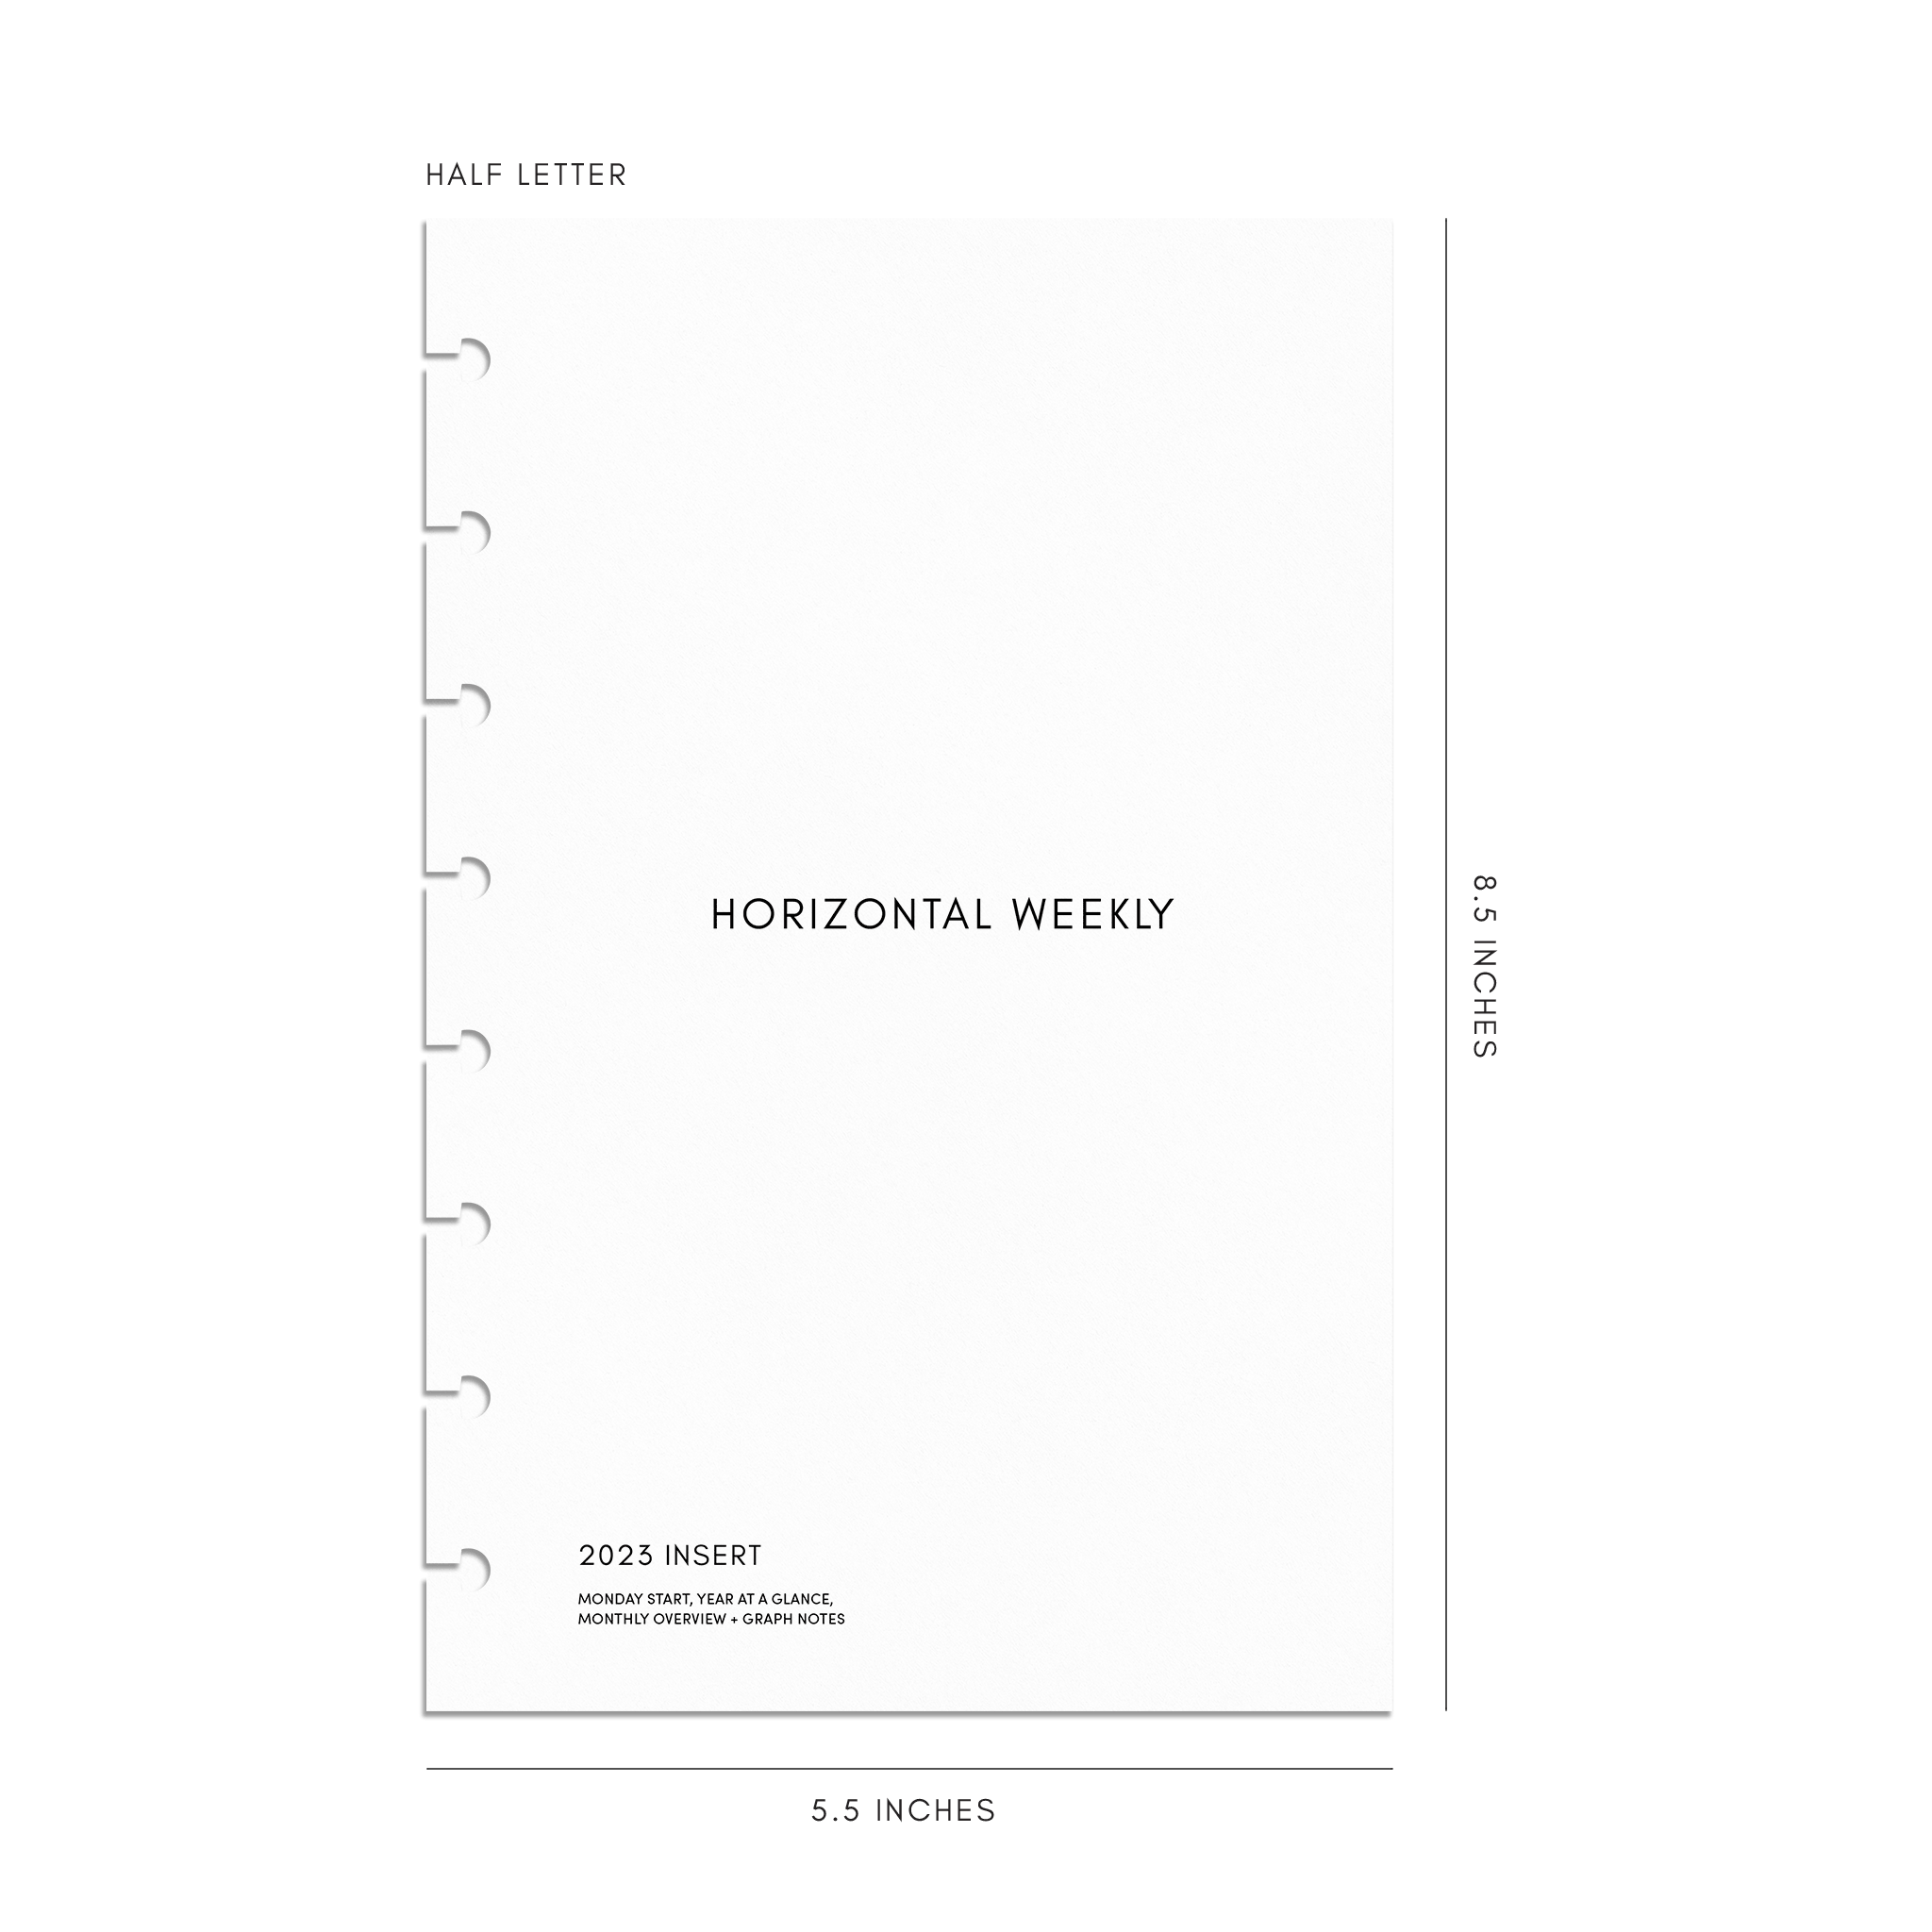 2023 Dated Planner Inserts | Daily | 2 Days Per Page